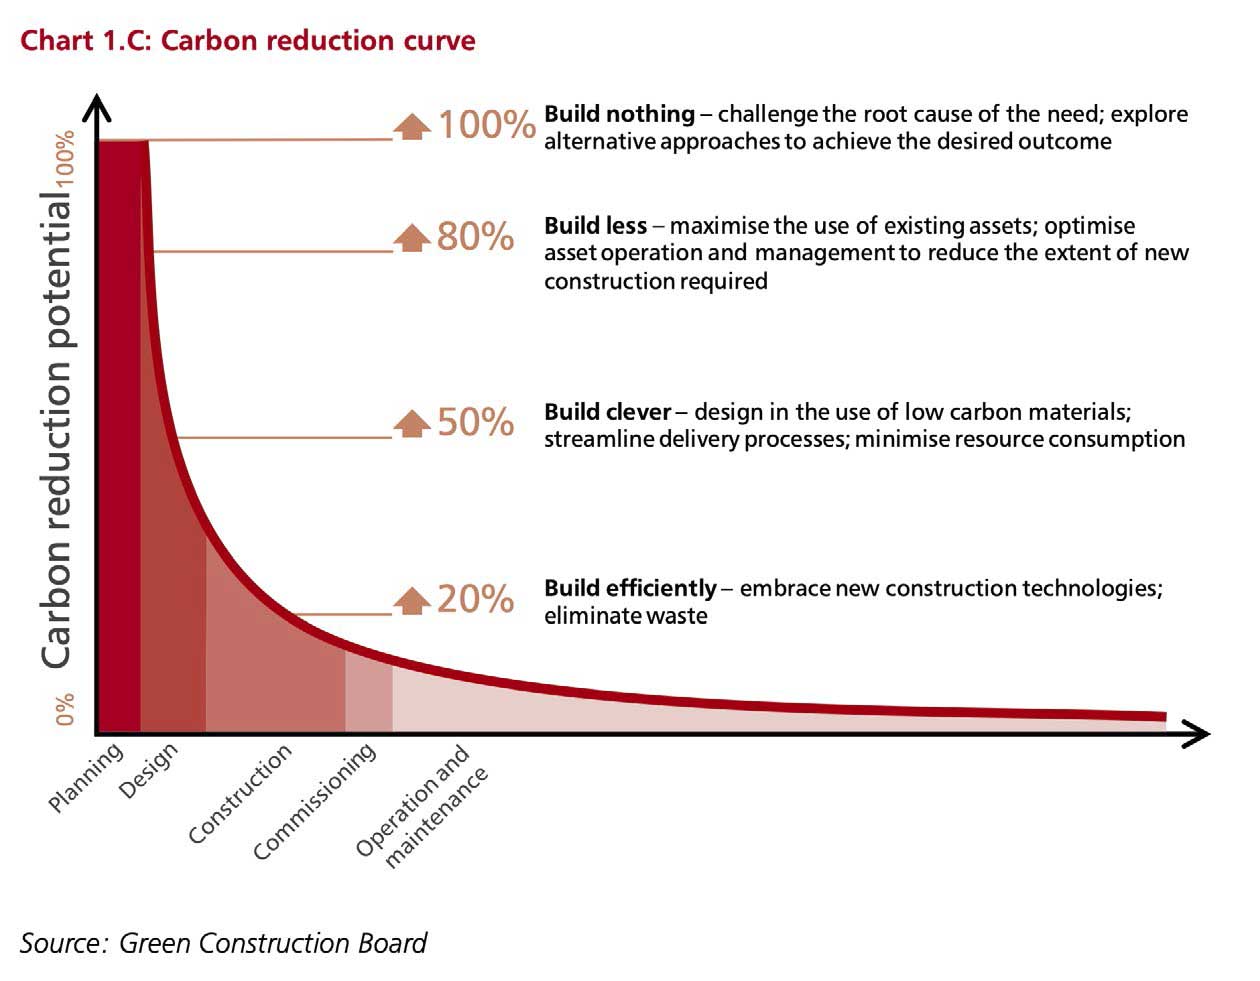 Hierarchy of ways to reduce the carbon footprint of construction. Source: HM Treasury (2013) and Green Construction Board (2013).